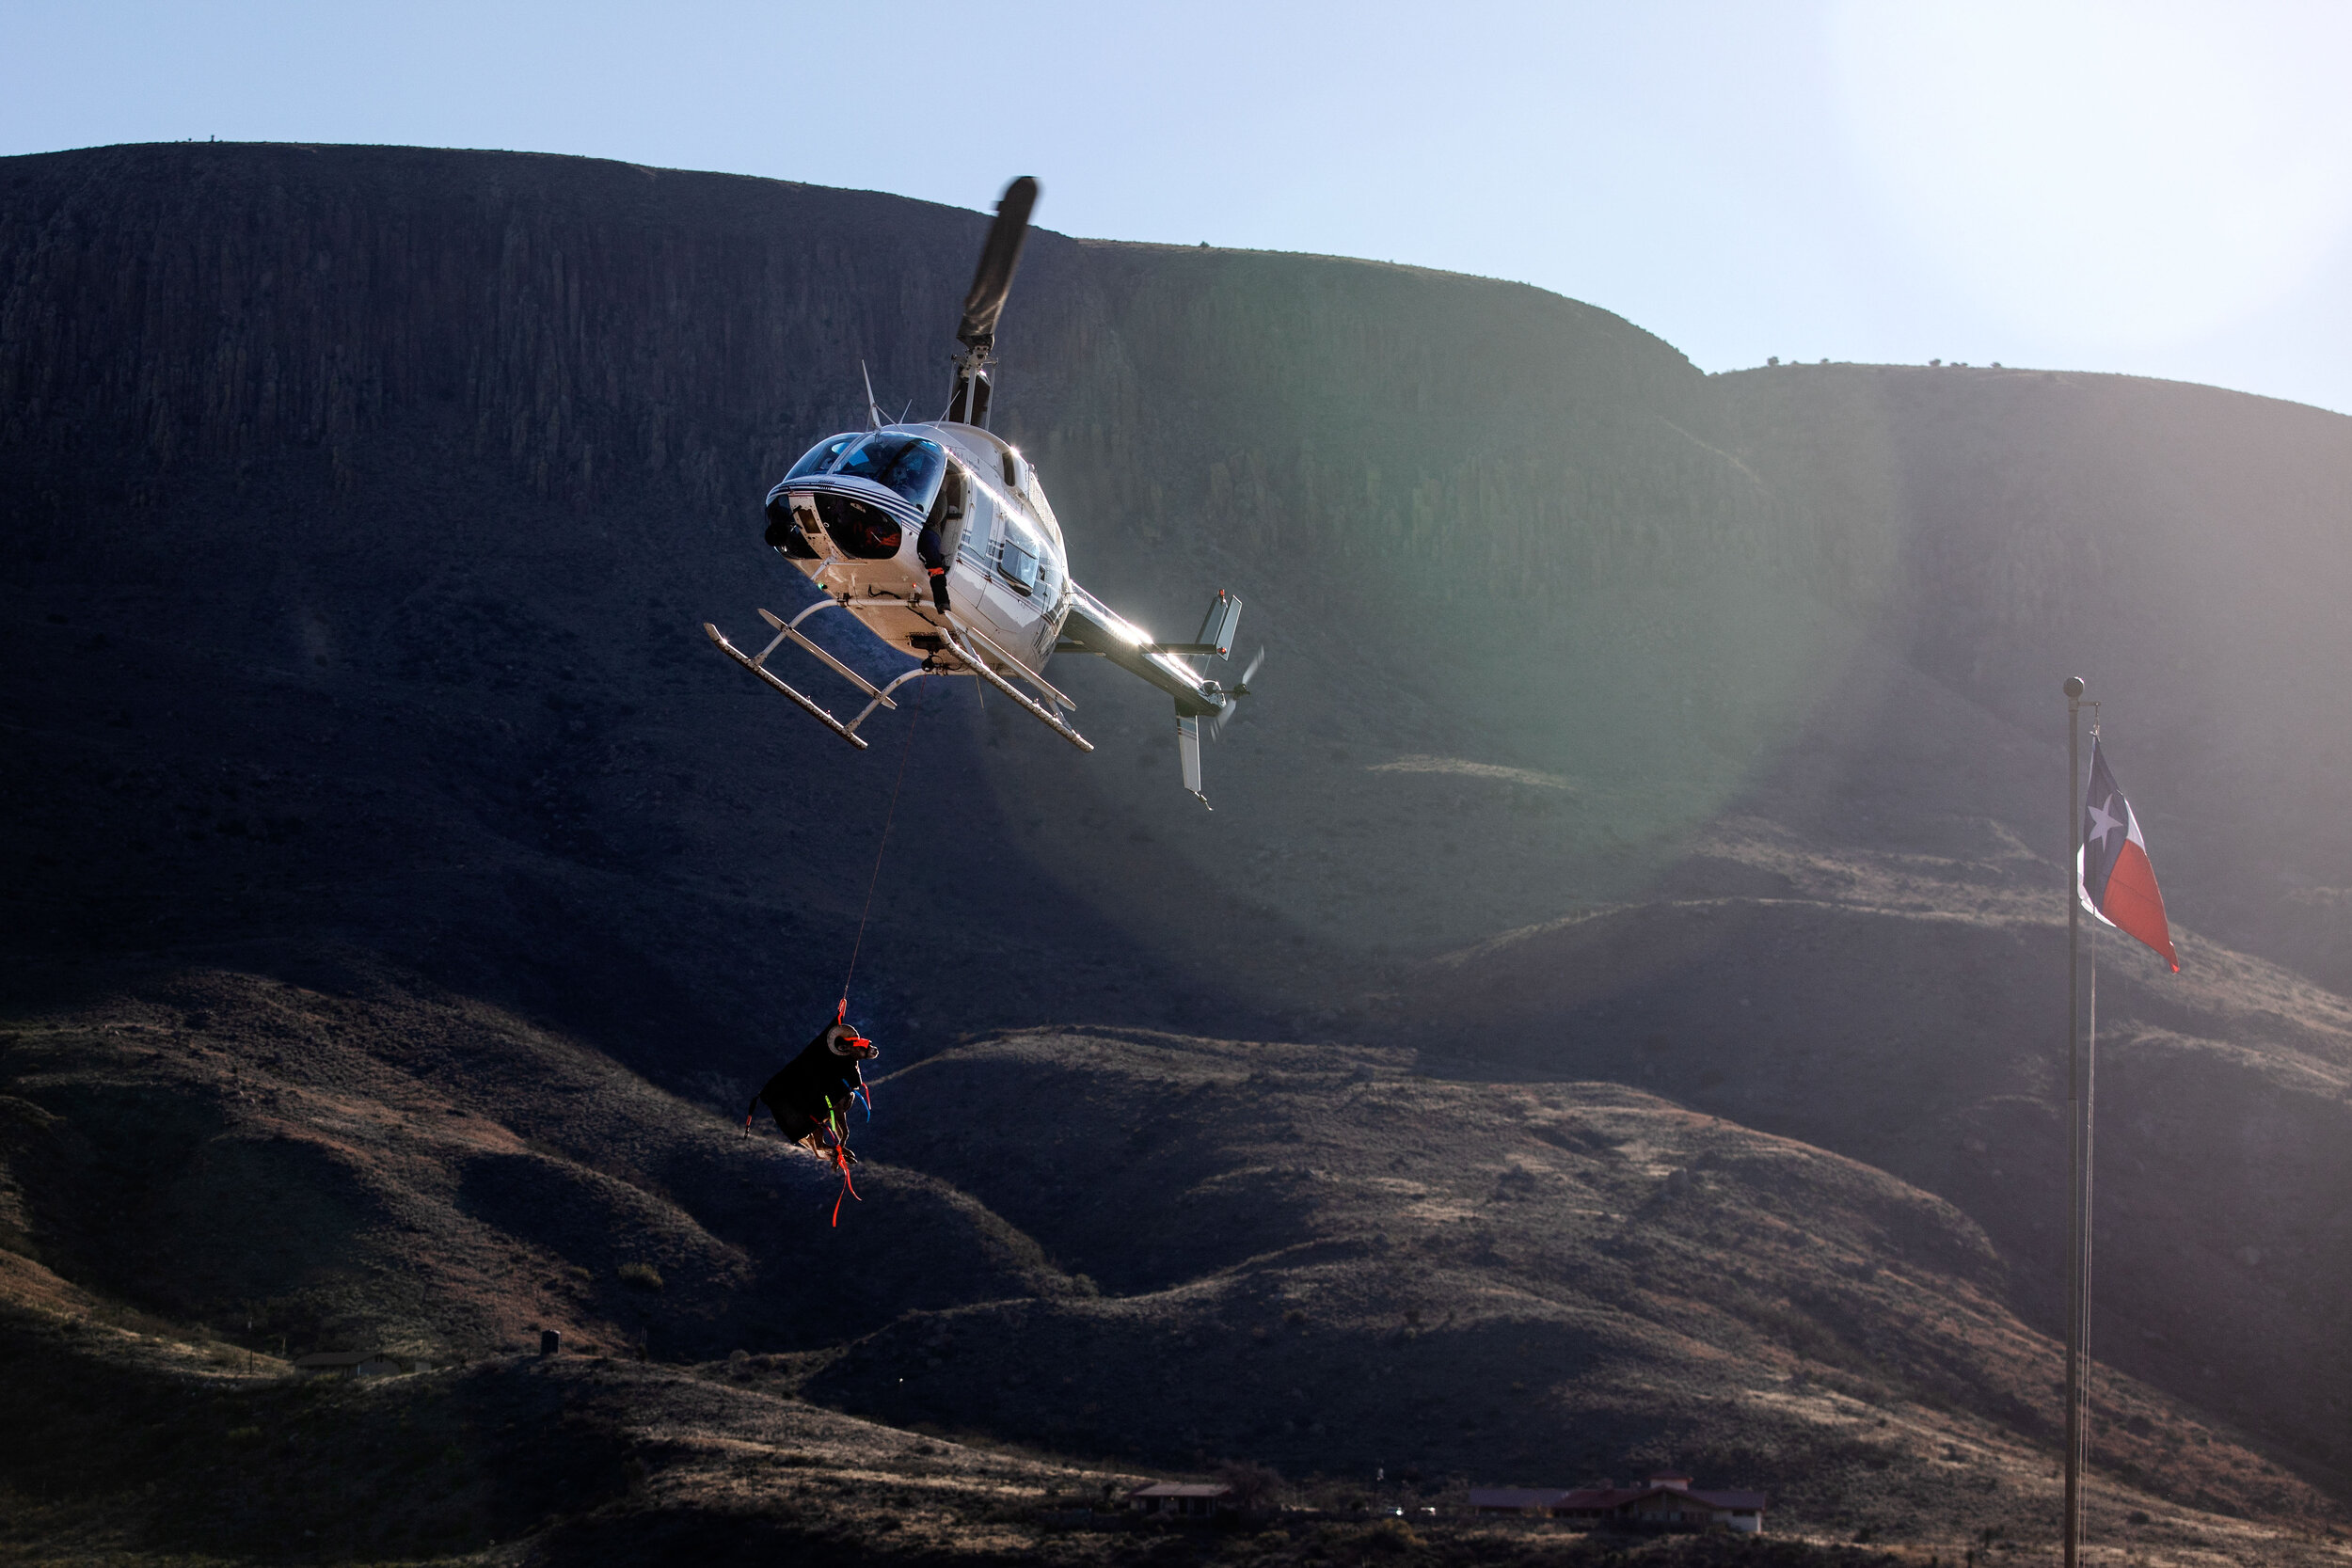  A helicopter maneuvers a sheep, blindfolded and dangling from the helicopter, to the field study site where veterinarians and researchers will collect data about the species.&nbsp; 